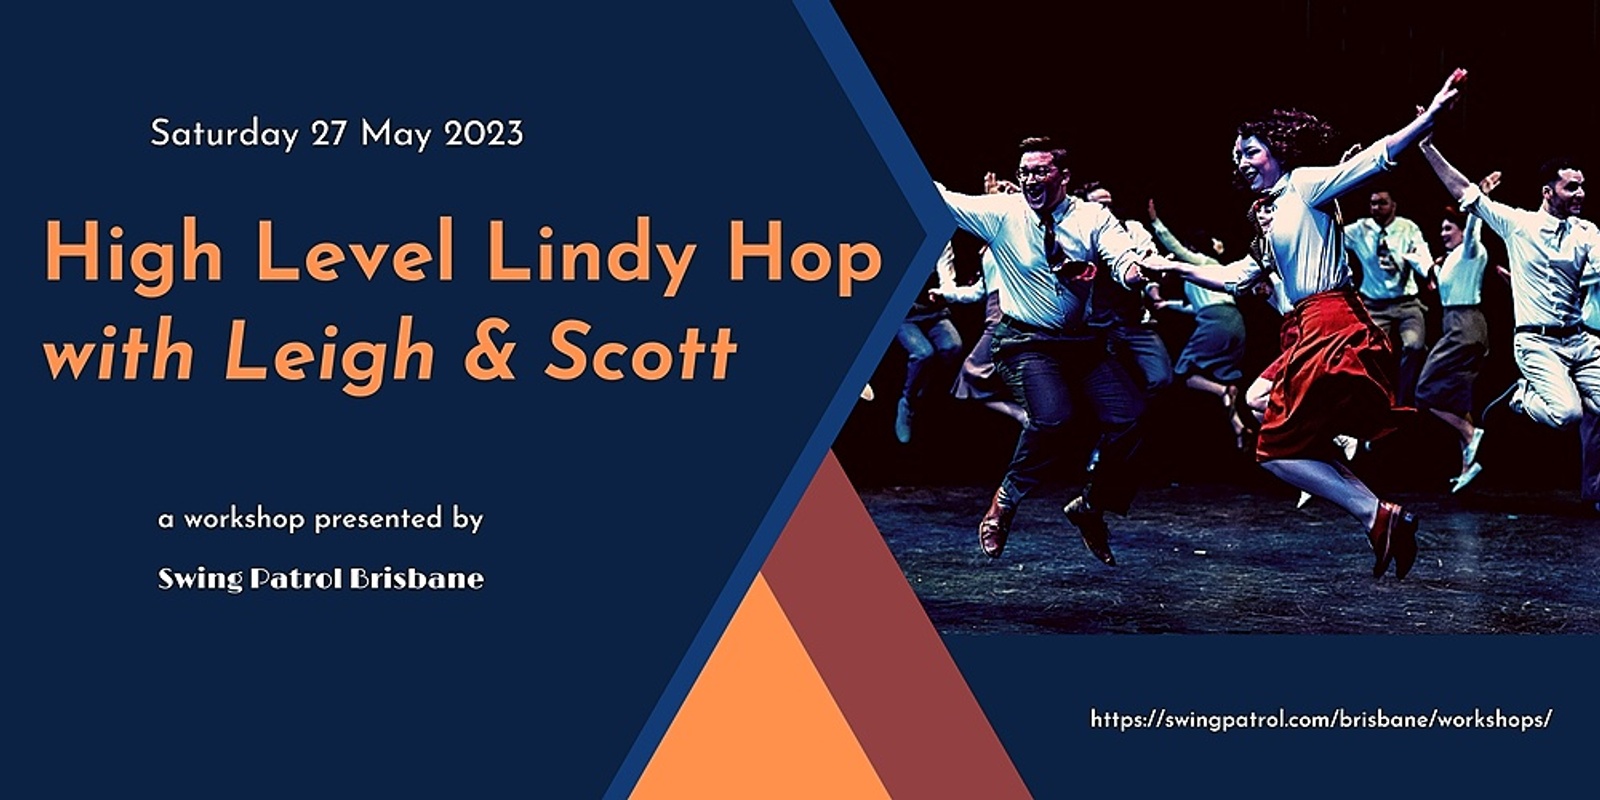 High Level Lindy Hop with Leigh & Scott